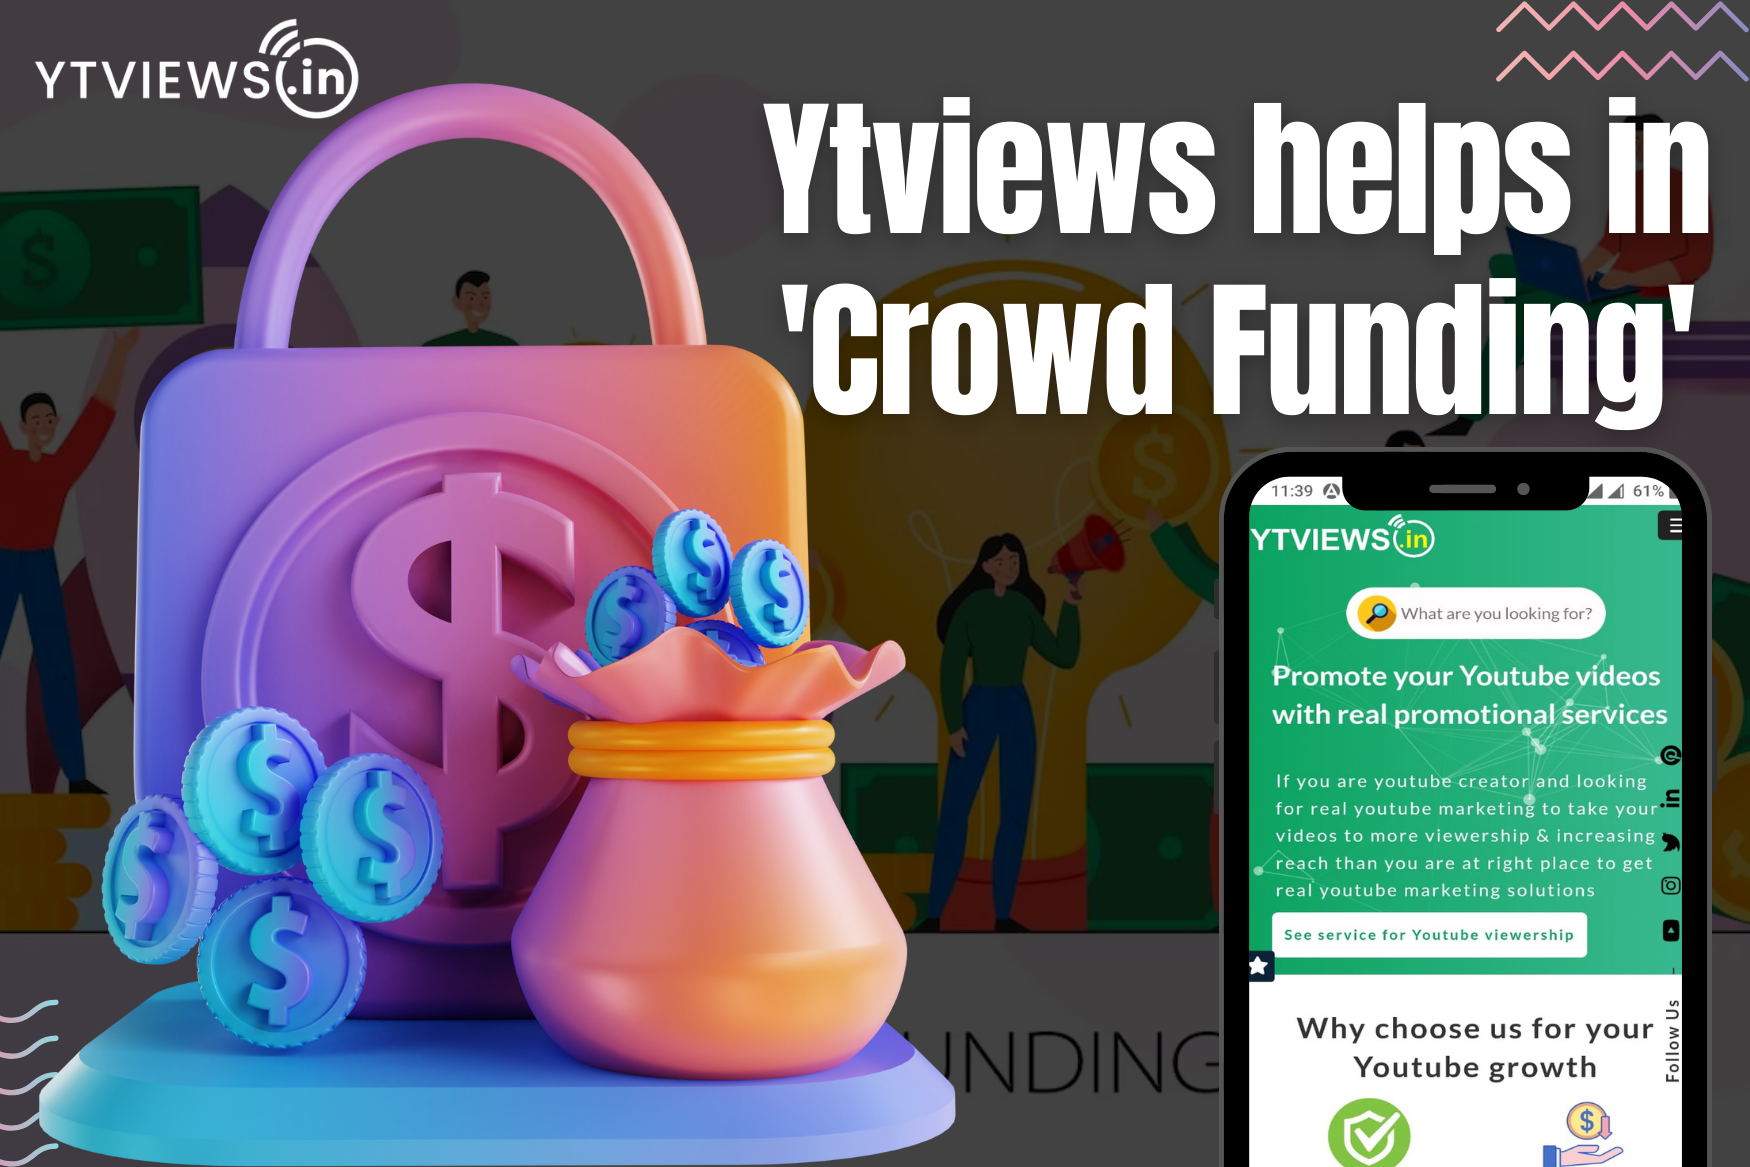 Ytviews provides organic followers which can help you impressively in crowdfunding